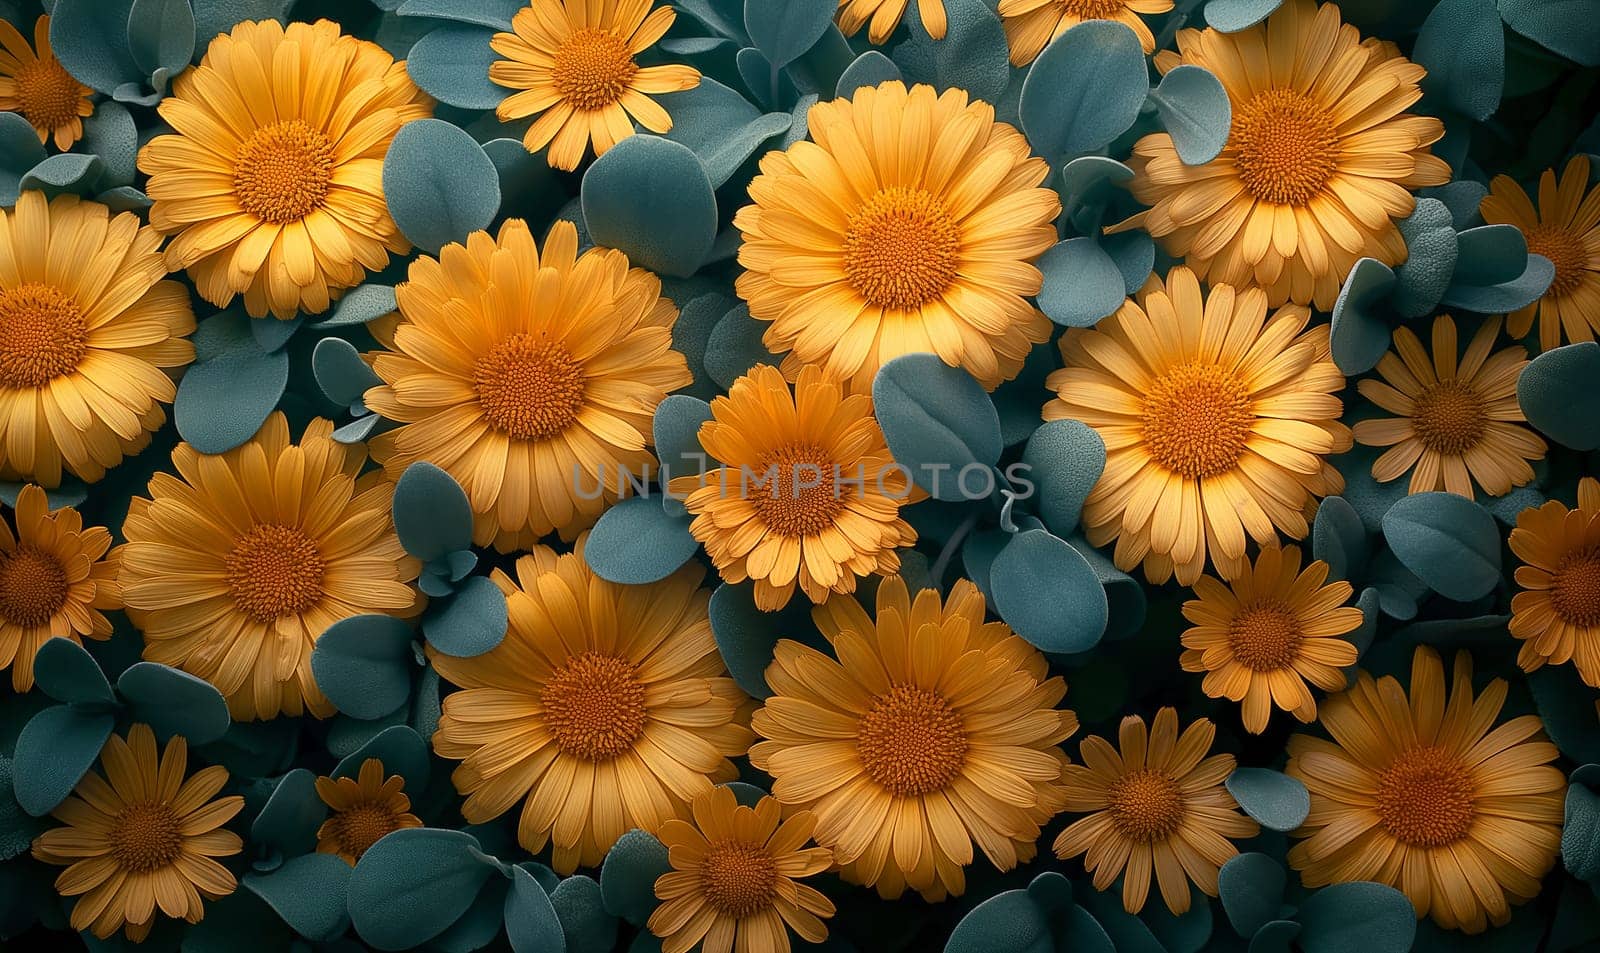 Close-up of vibrant marigolds in natural light.